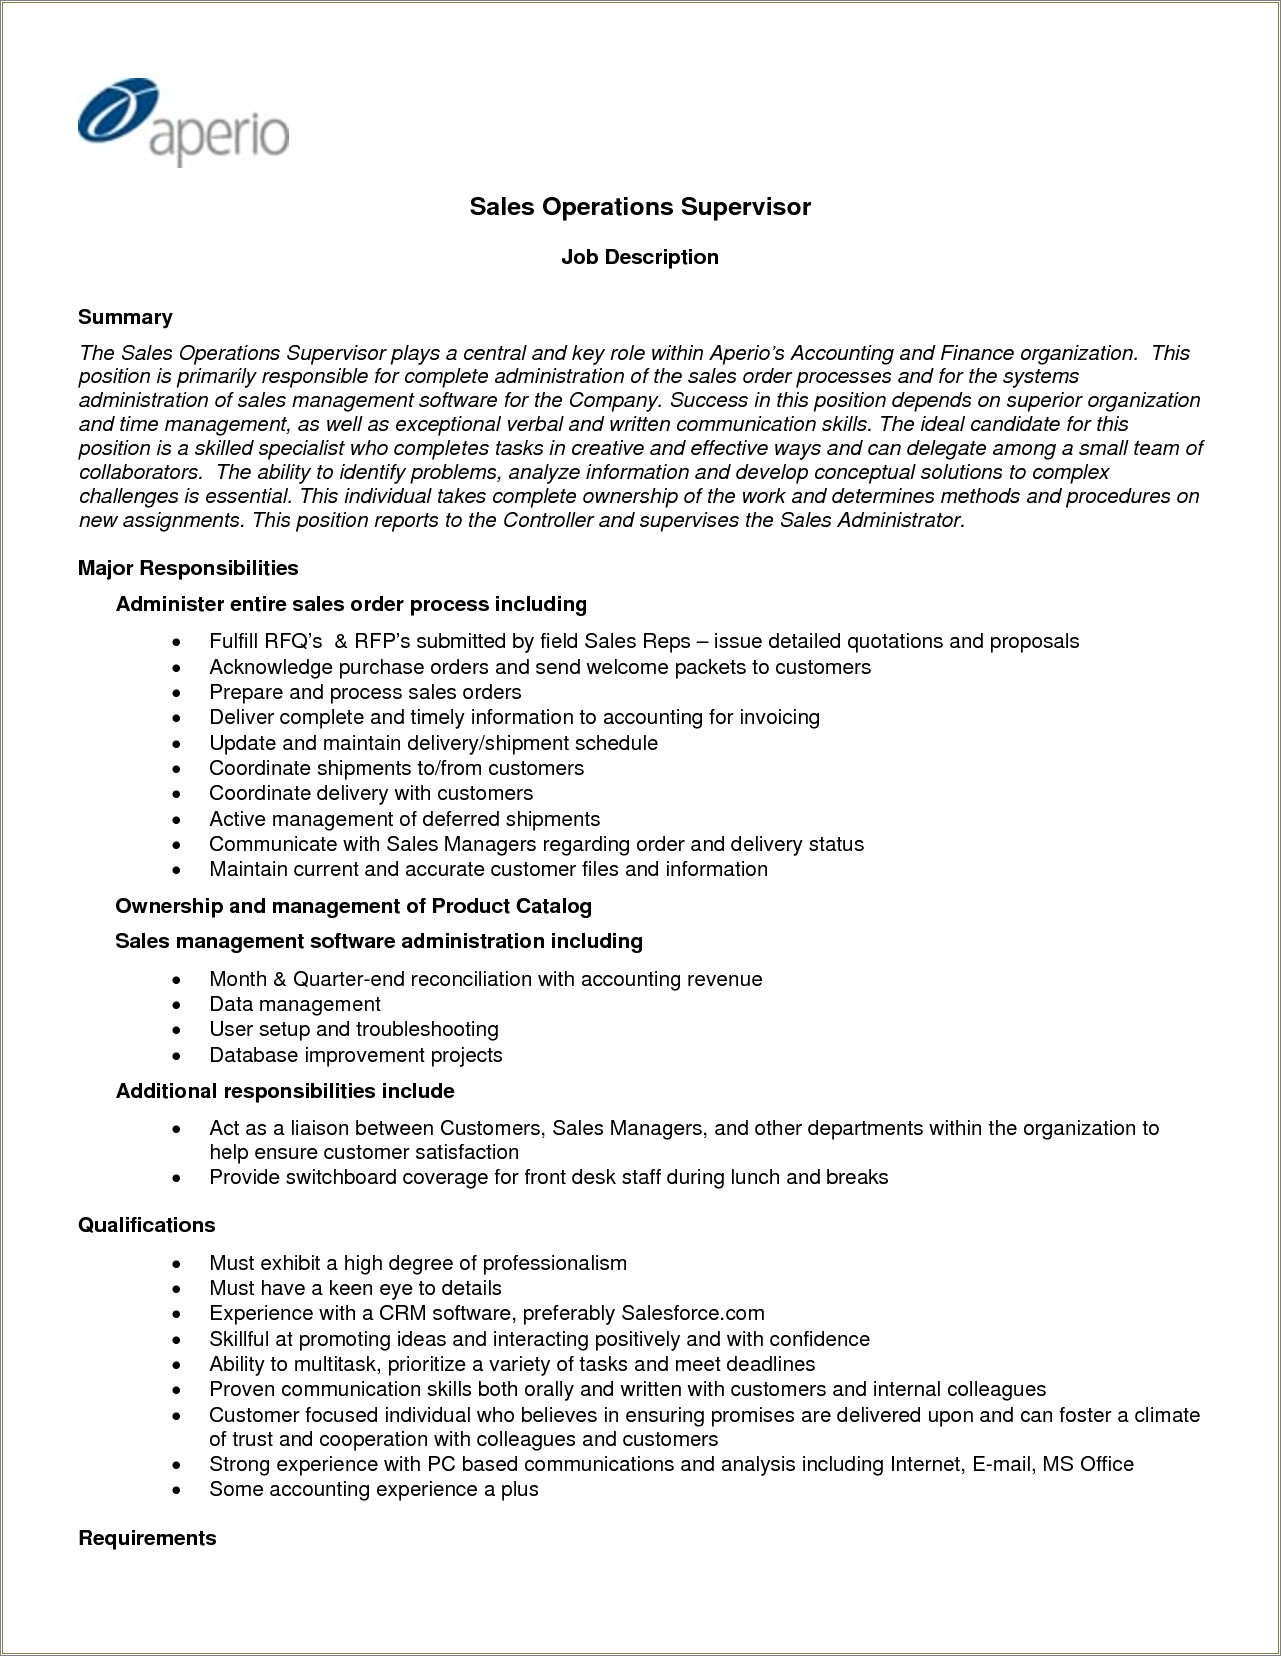 Sample Objective For Training And Development Resume